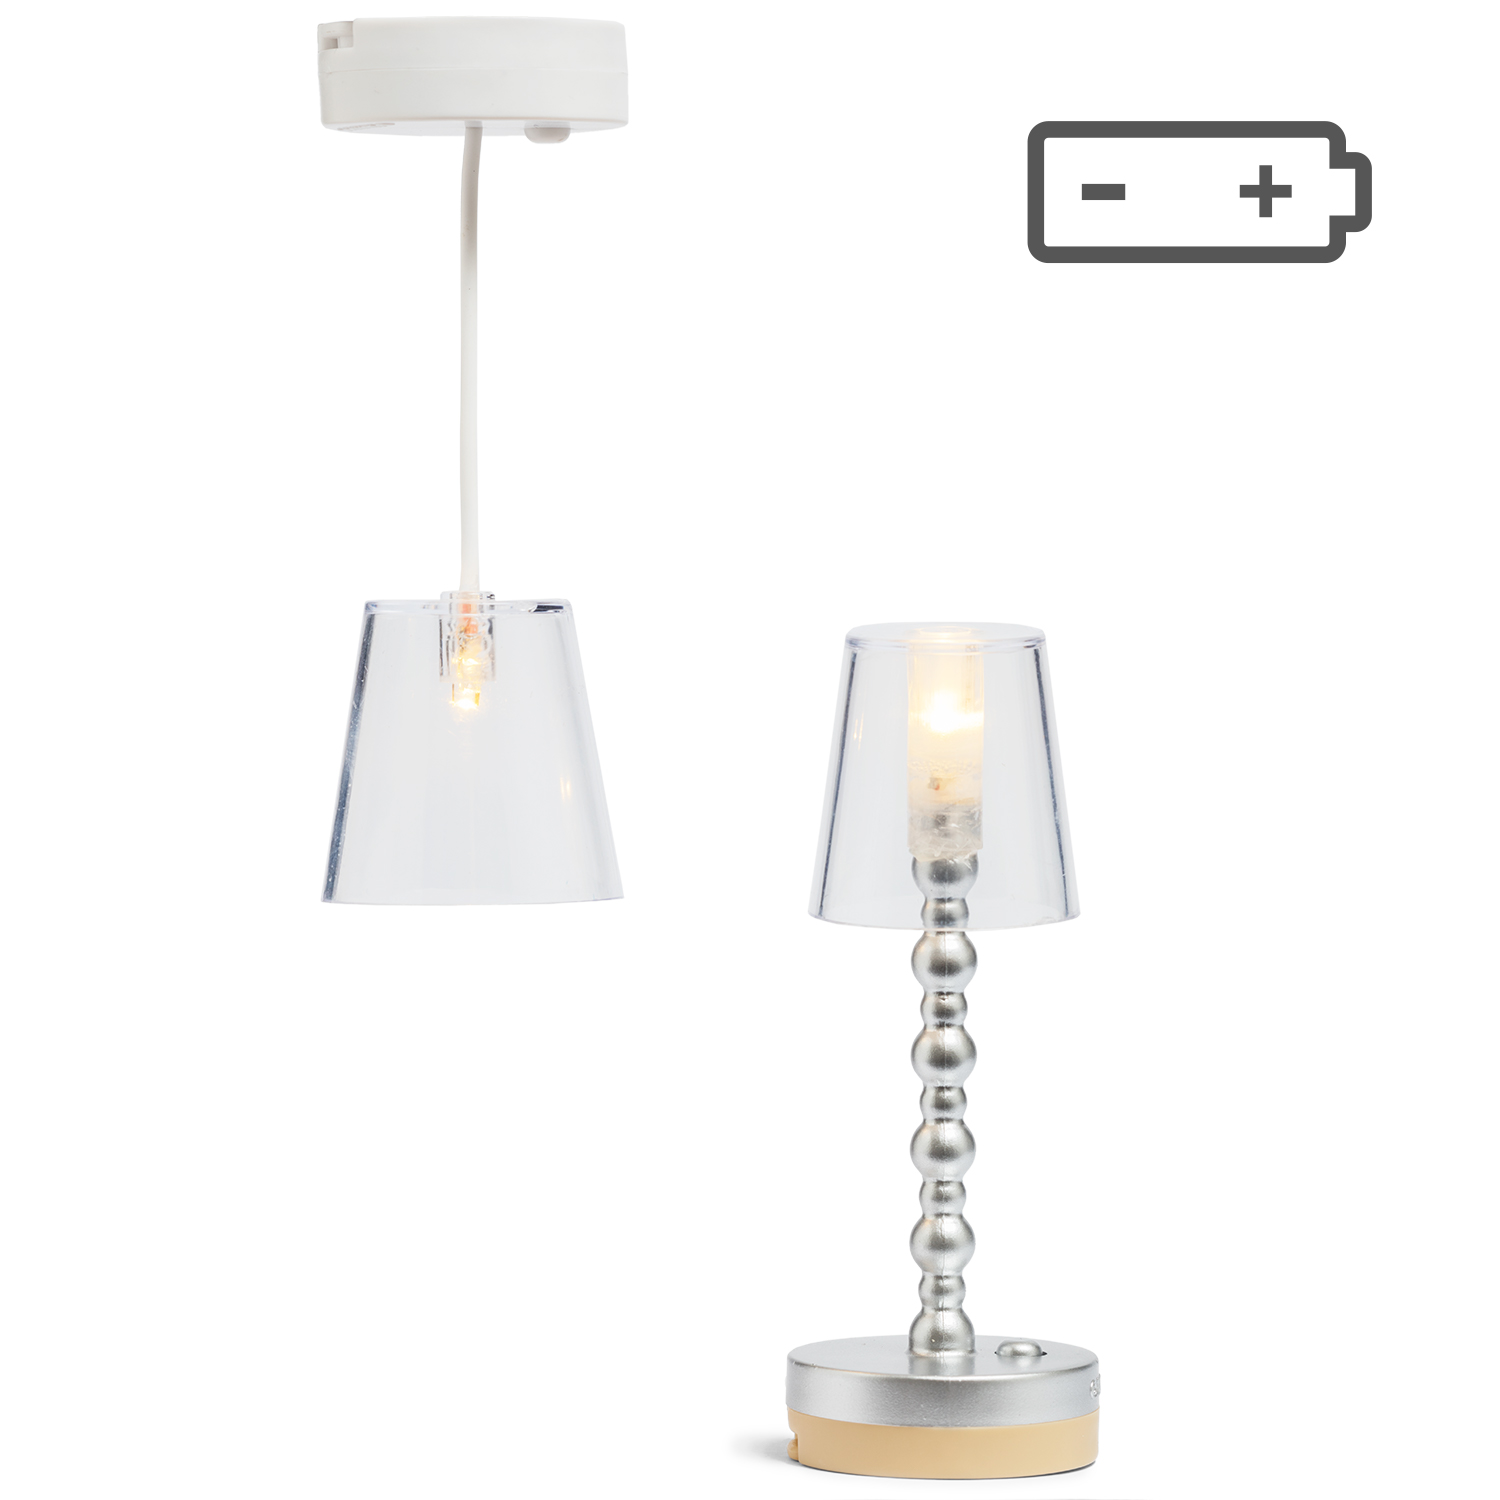 Doll house furniture & doll house accessories lundby doll house lighting floor & ceiling lamps